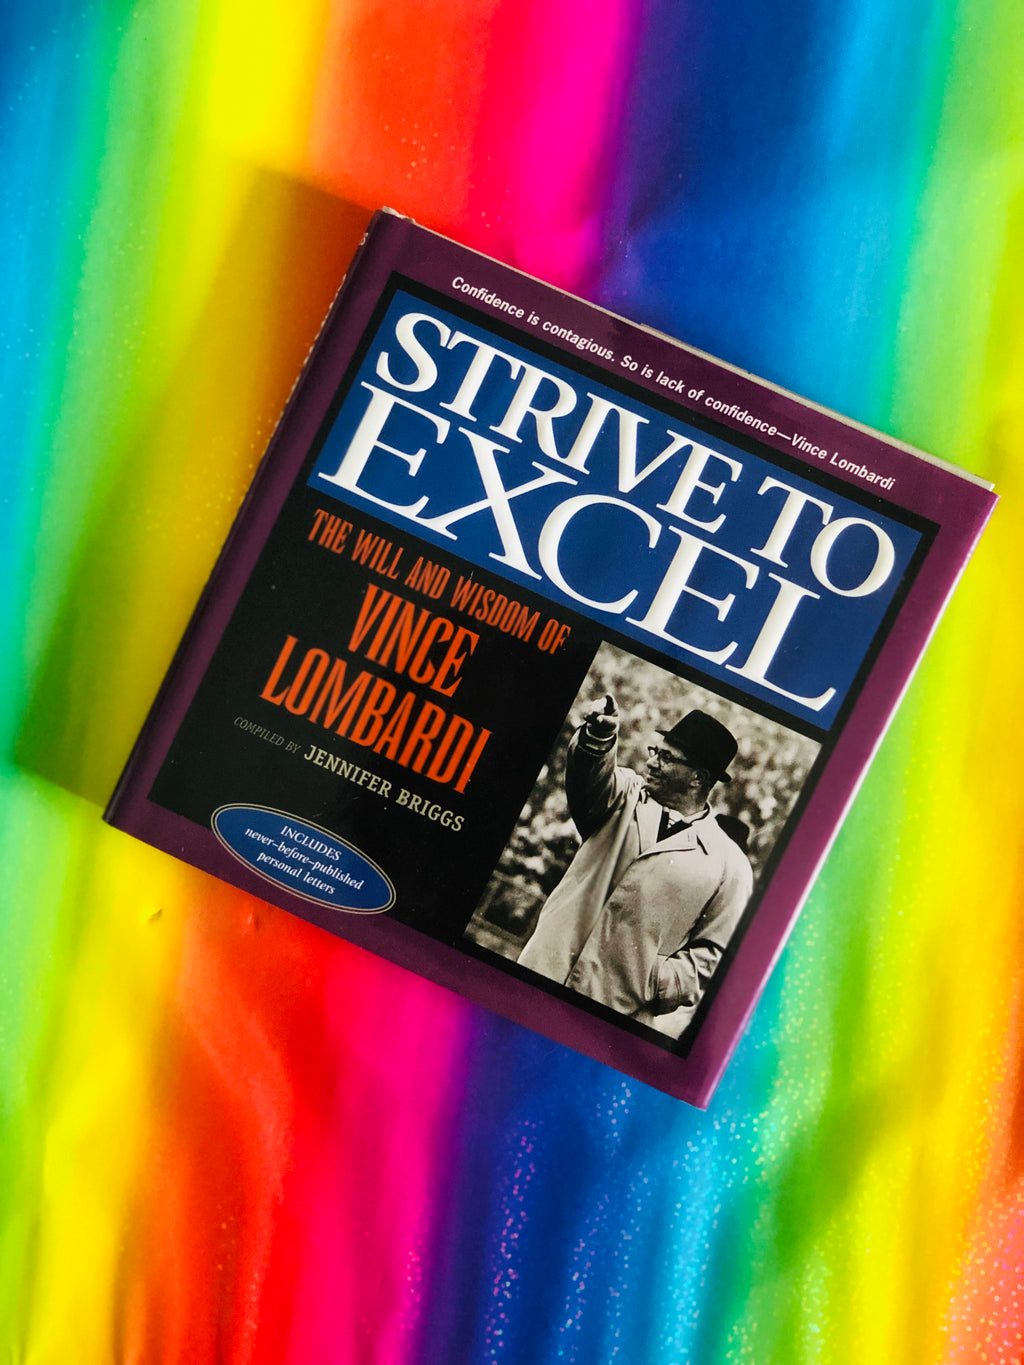 Strive To Excel The Will And Wisdom Of Vince Lombardi compiled by Jennifer Briggs